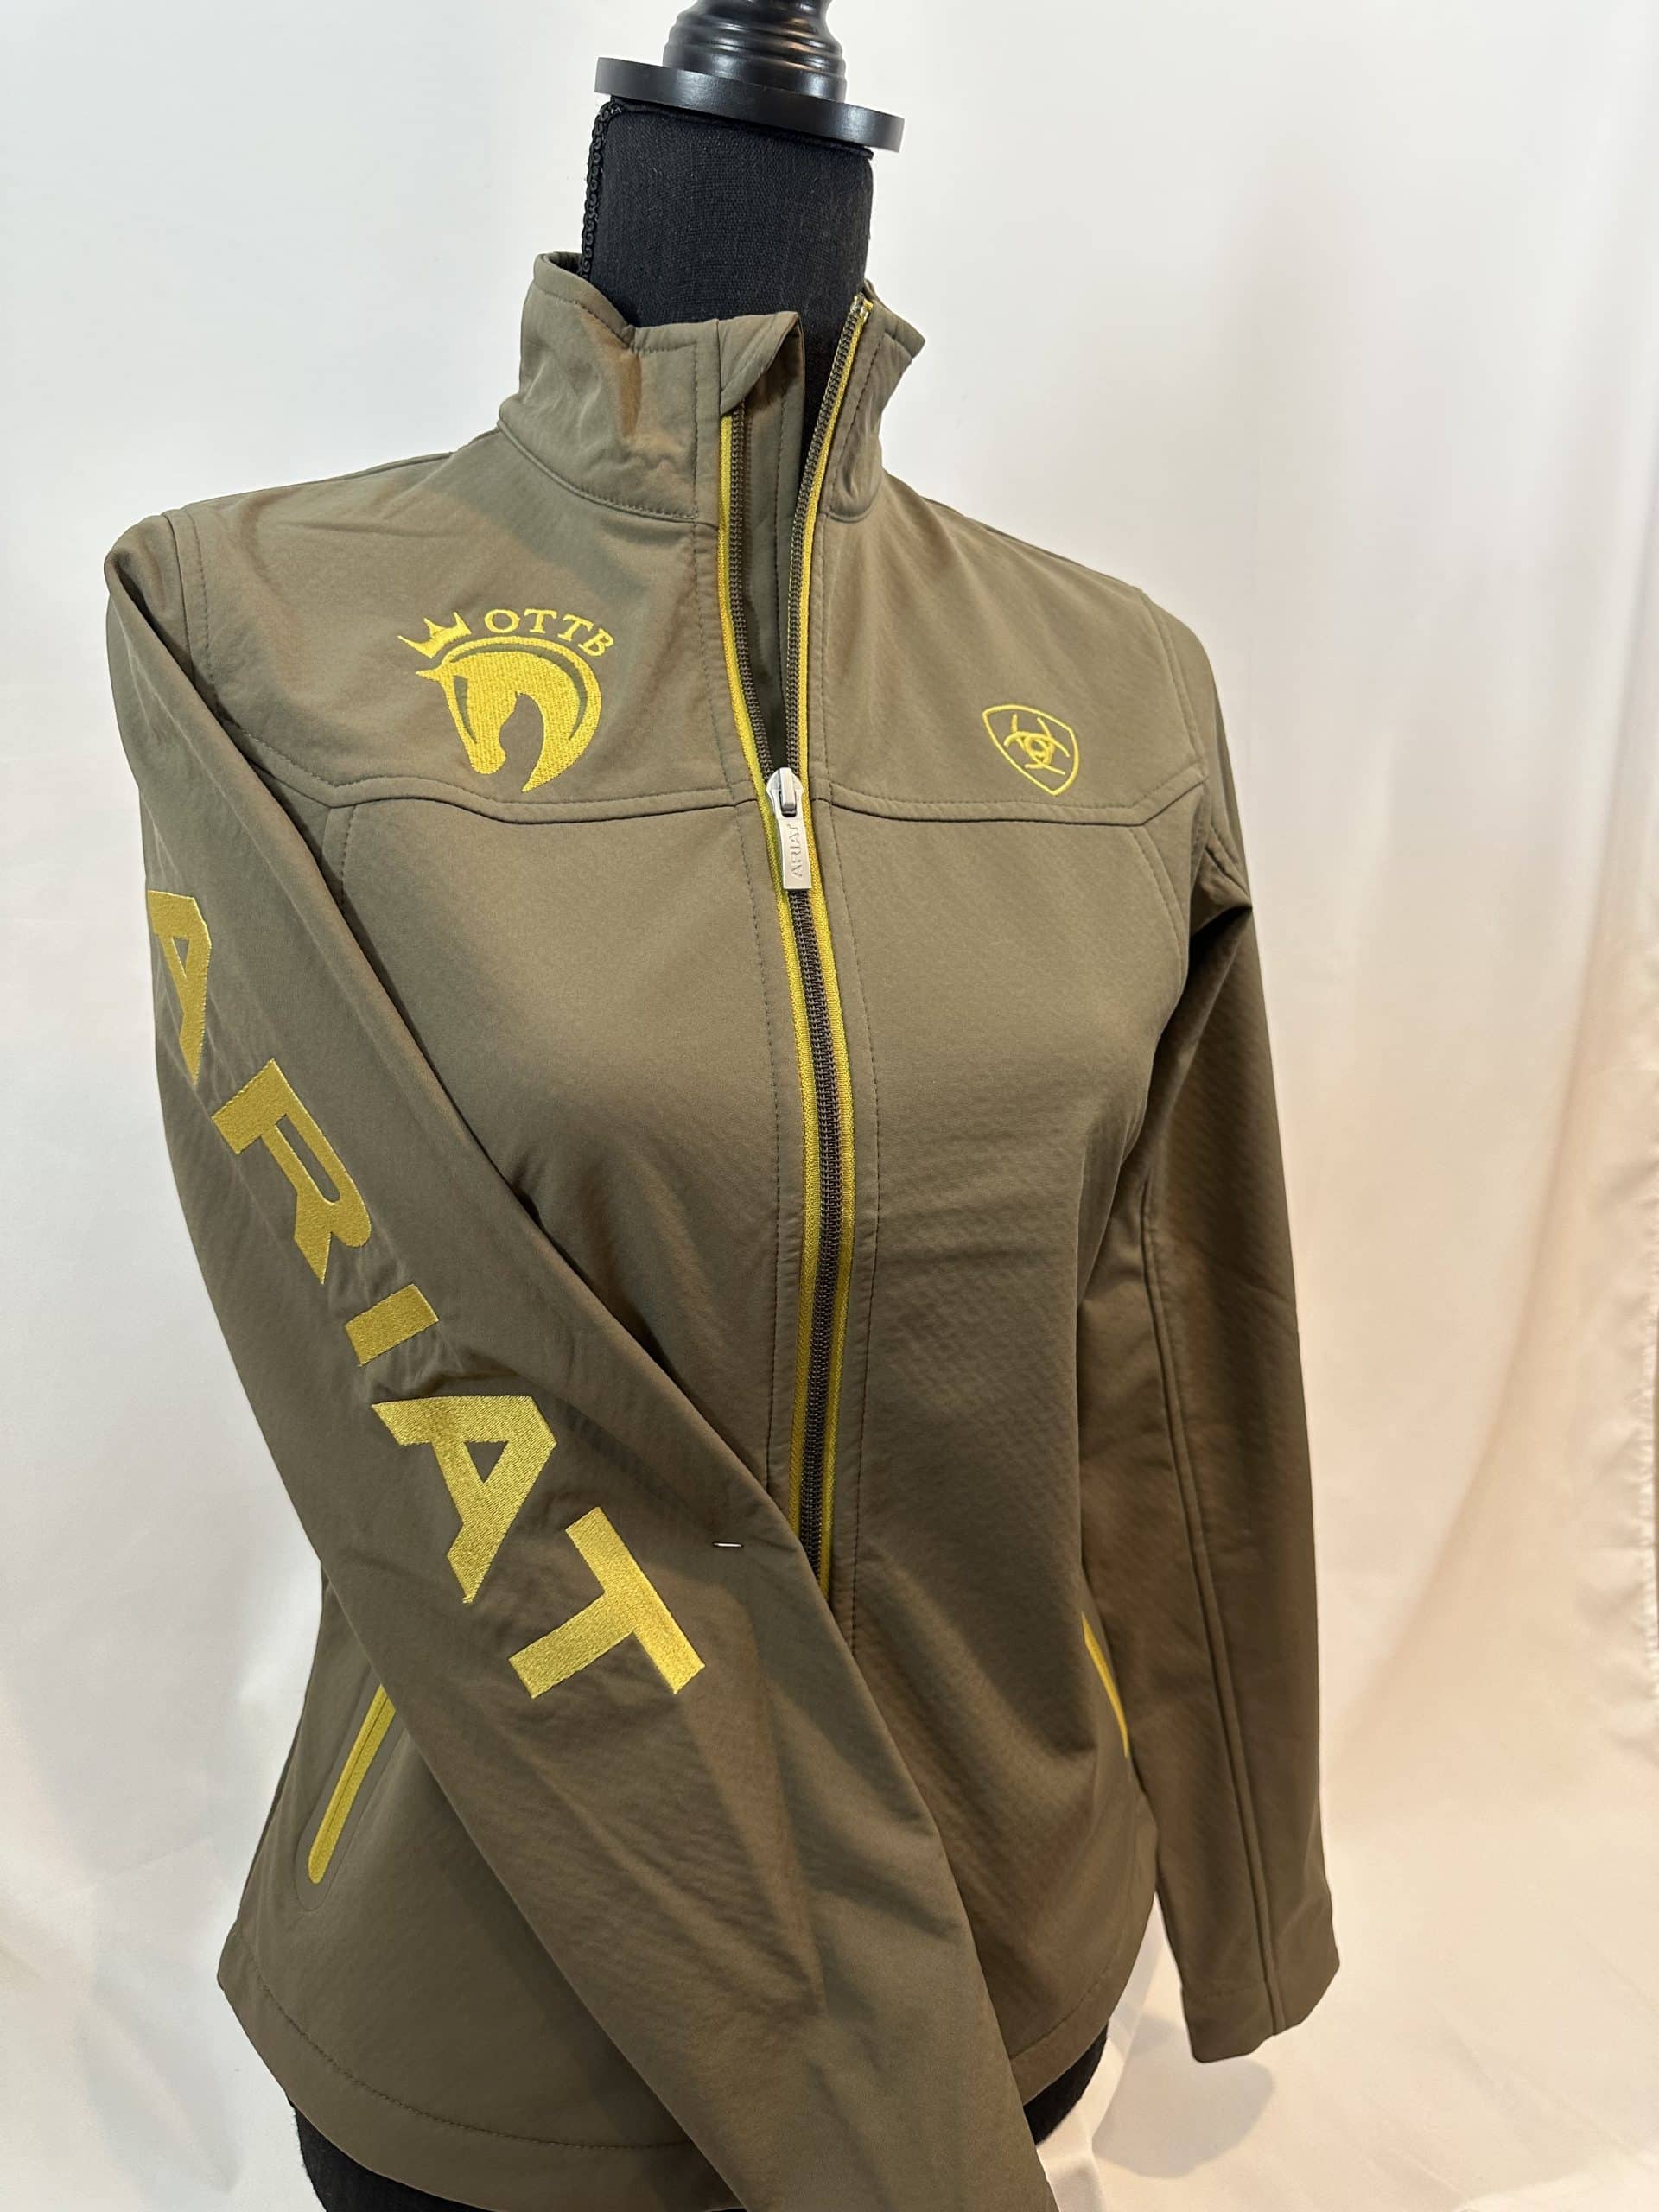 Ariat TEAM Softshell Jacket- Ladies - Retired Racehorse Project